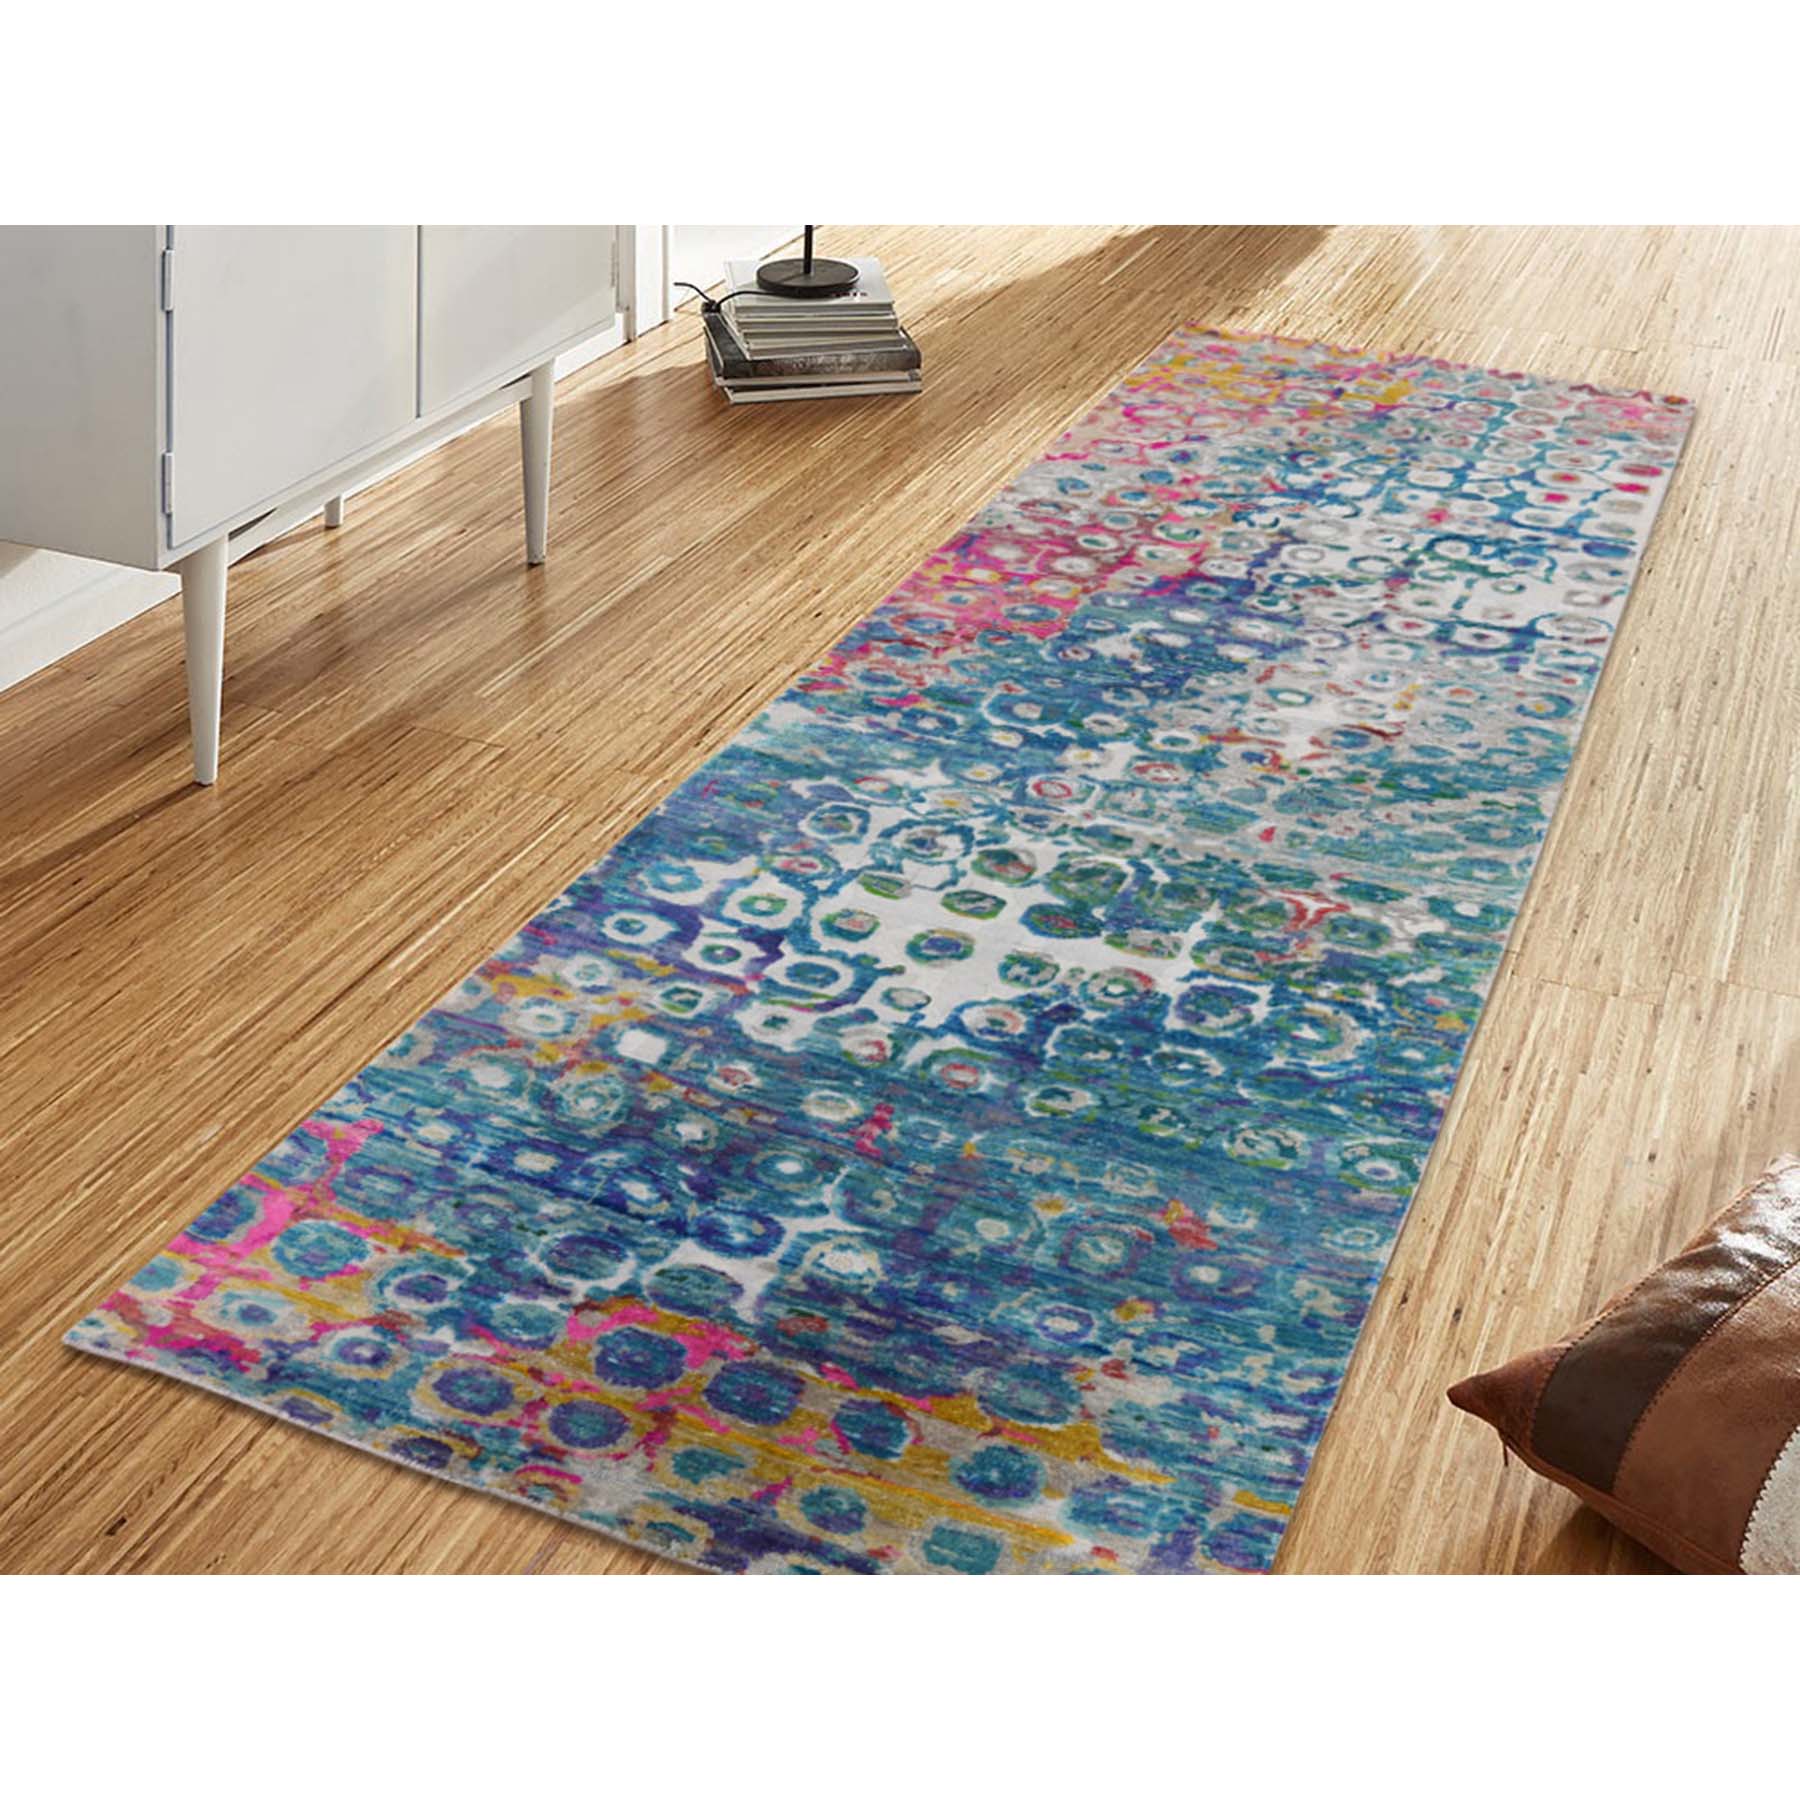 2-8 x10-4  THE PEACOCK Sari Silk Colorful Runner Hand-Knotted Oriental Rug 